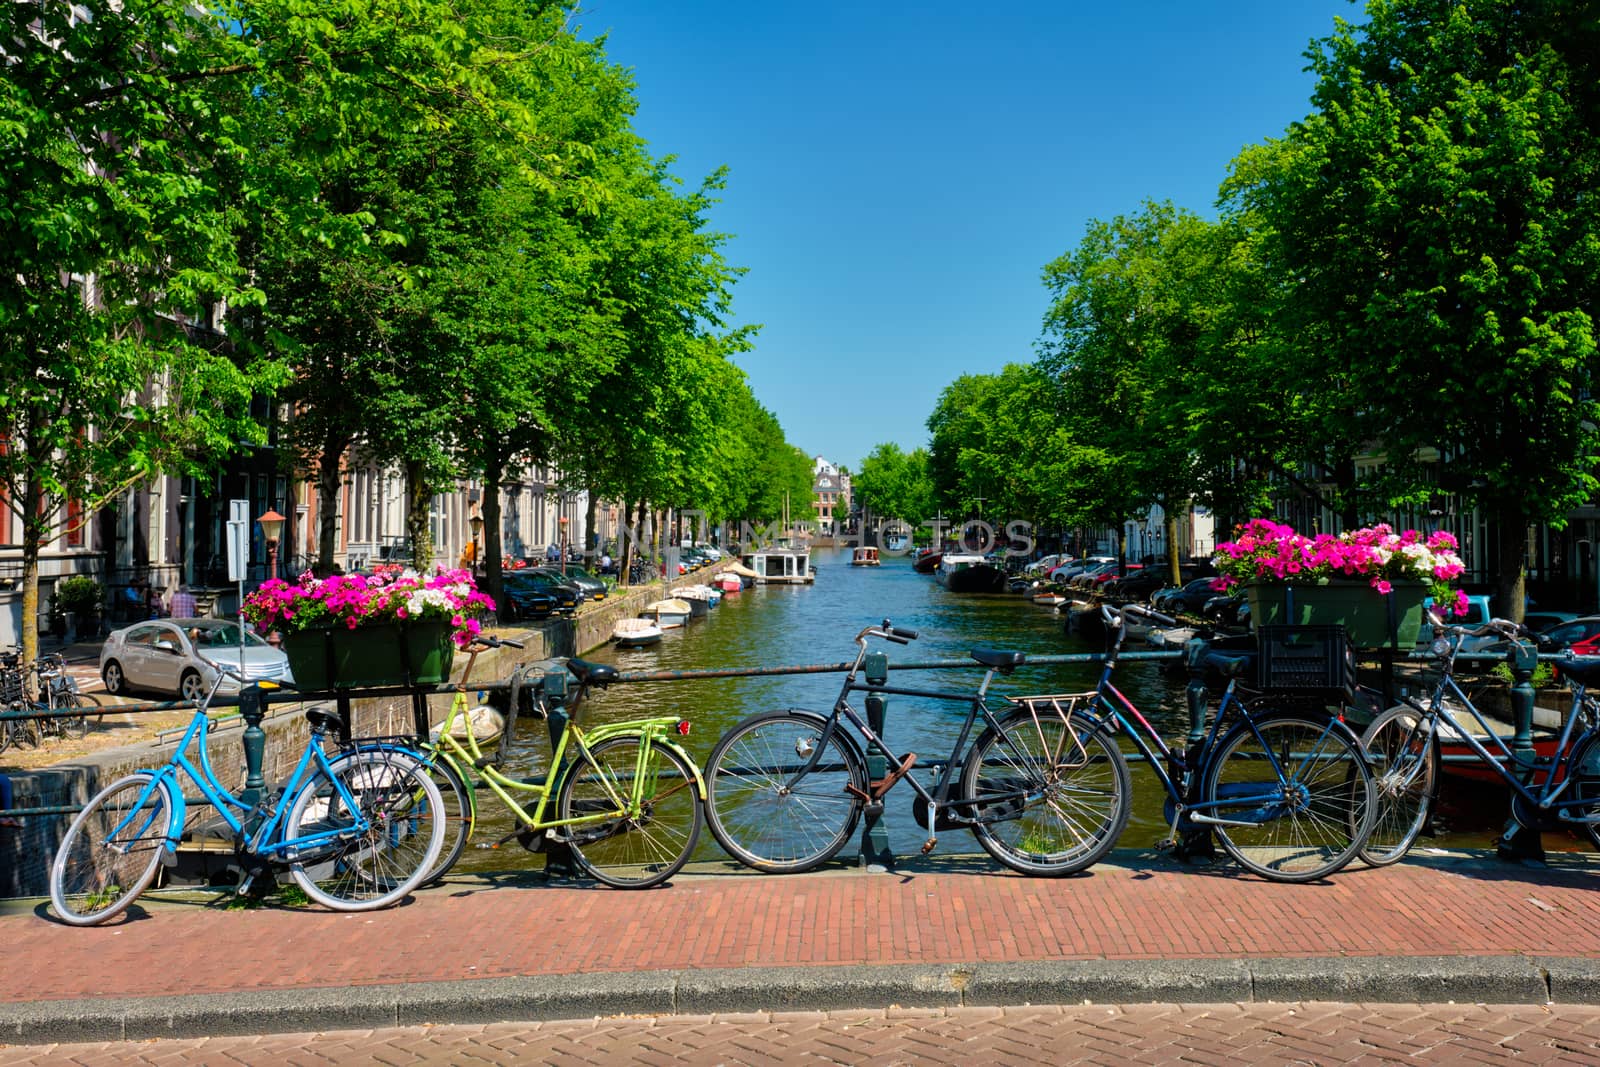 Typical Amsterdam view - Amsterdam canal with boats and bicycles on a bridge with flowers. Amsterdam, Netherlands